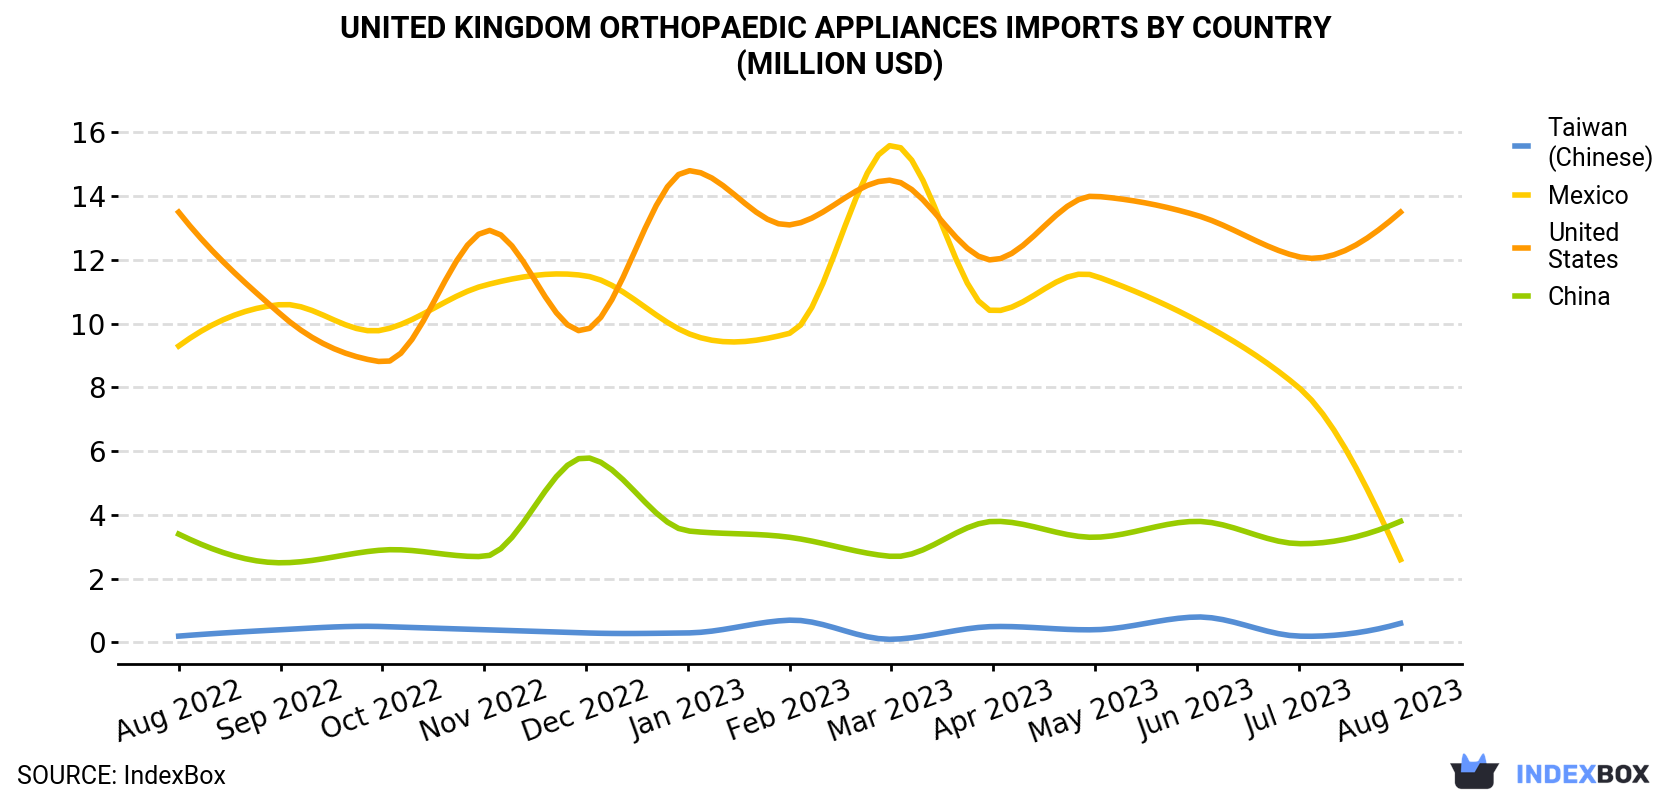 United Kingdom Orthopaedic Appliances Imports By Country (Million USD)